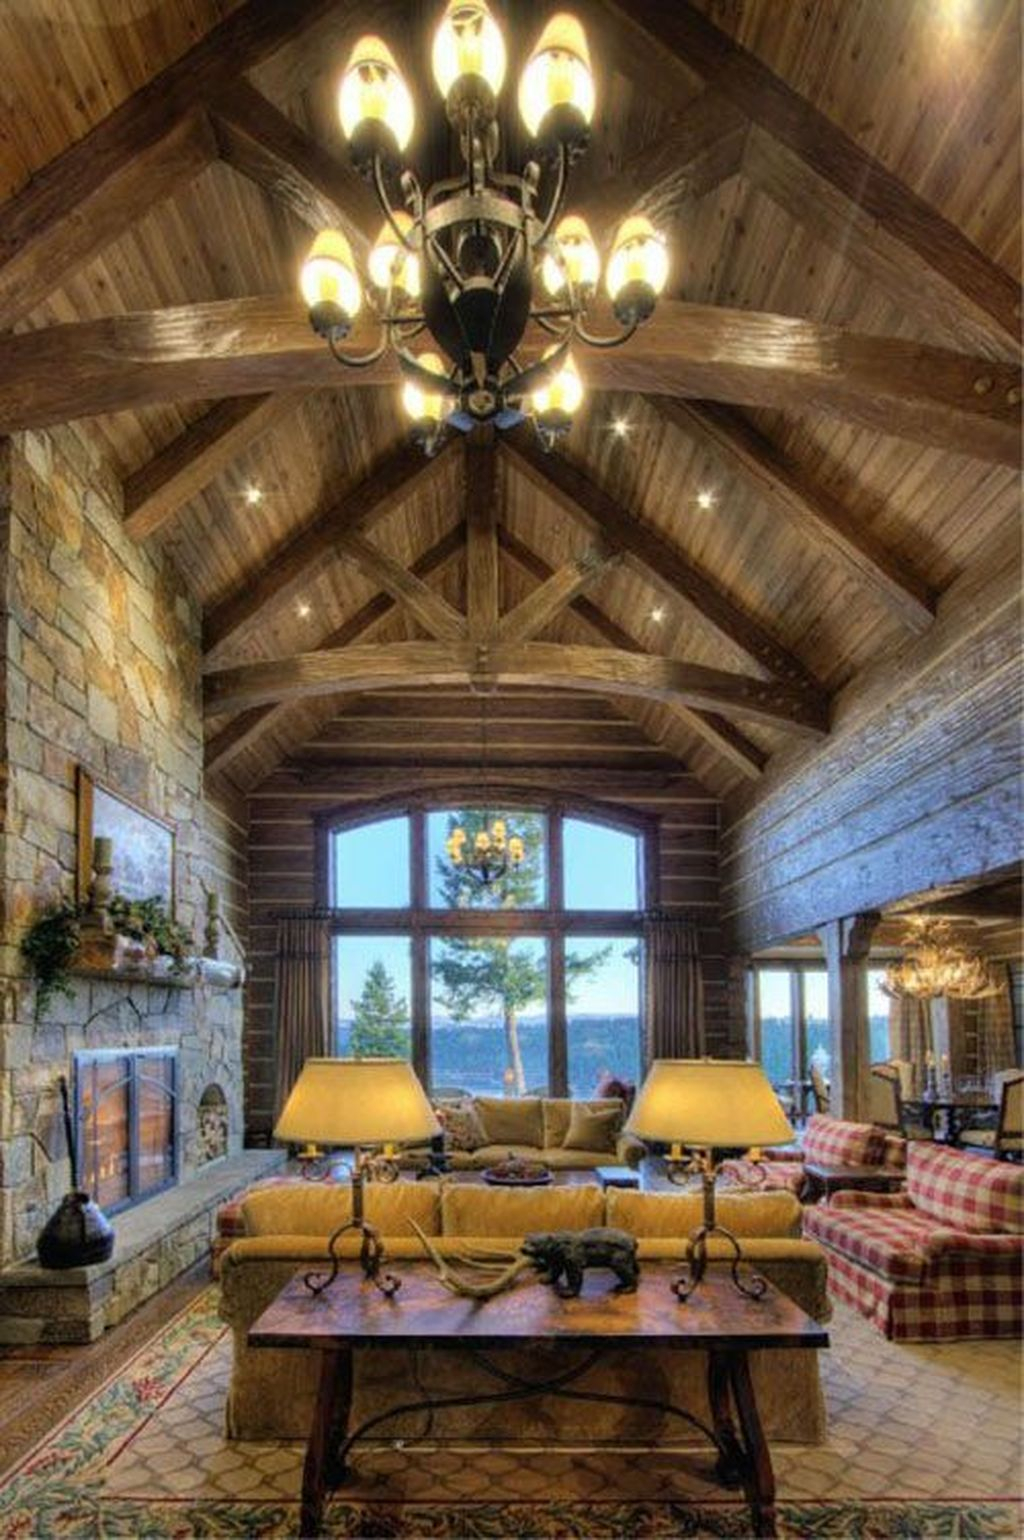 Gorgeous Log Cabin Style Home Interior Design02